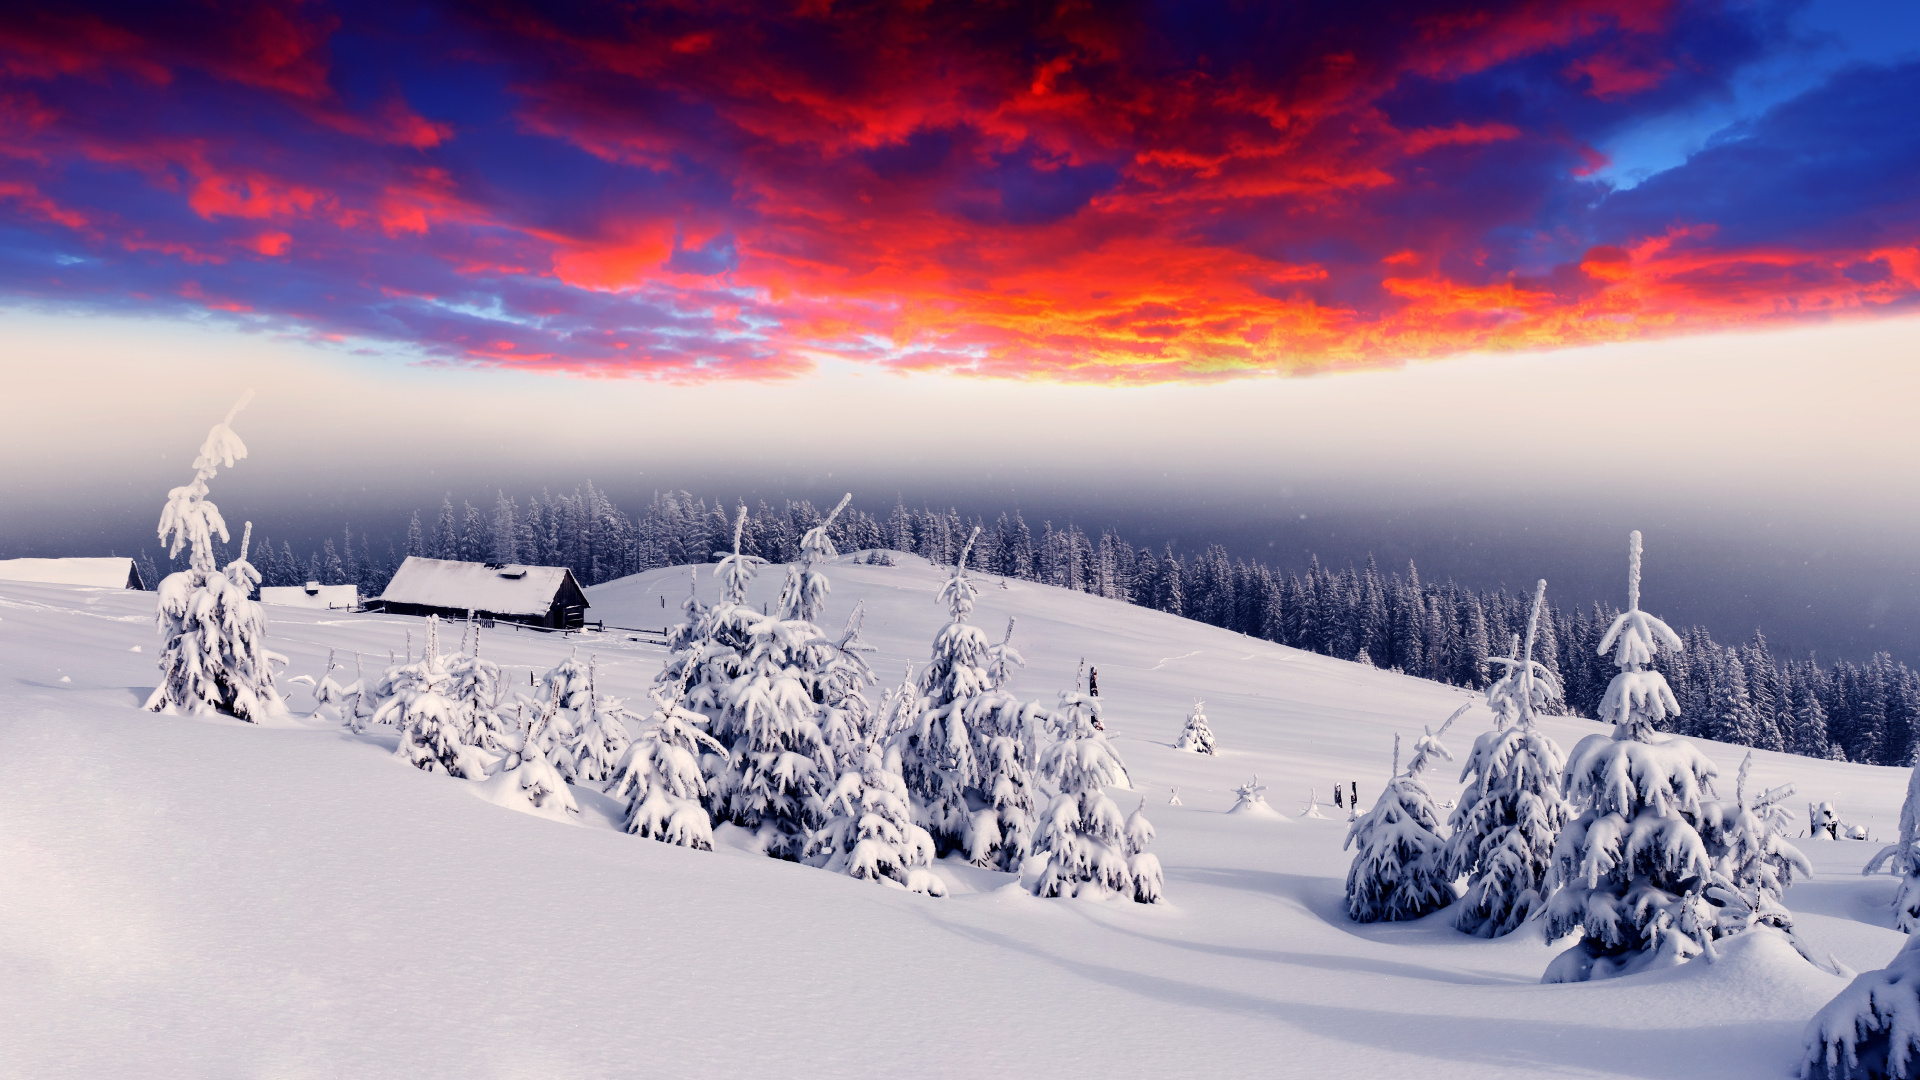 Snow Covered Field During Sunset. Wallpaper in 1920x1080 Resolution